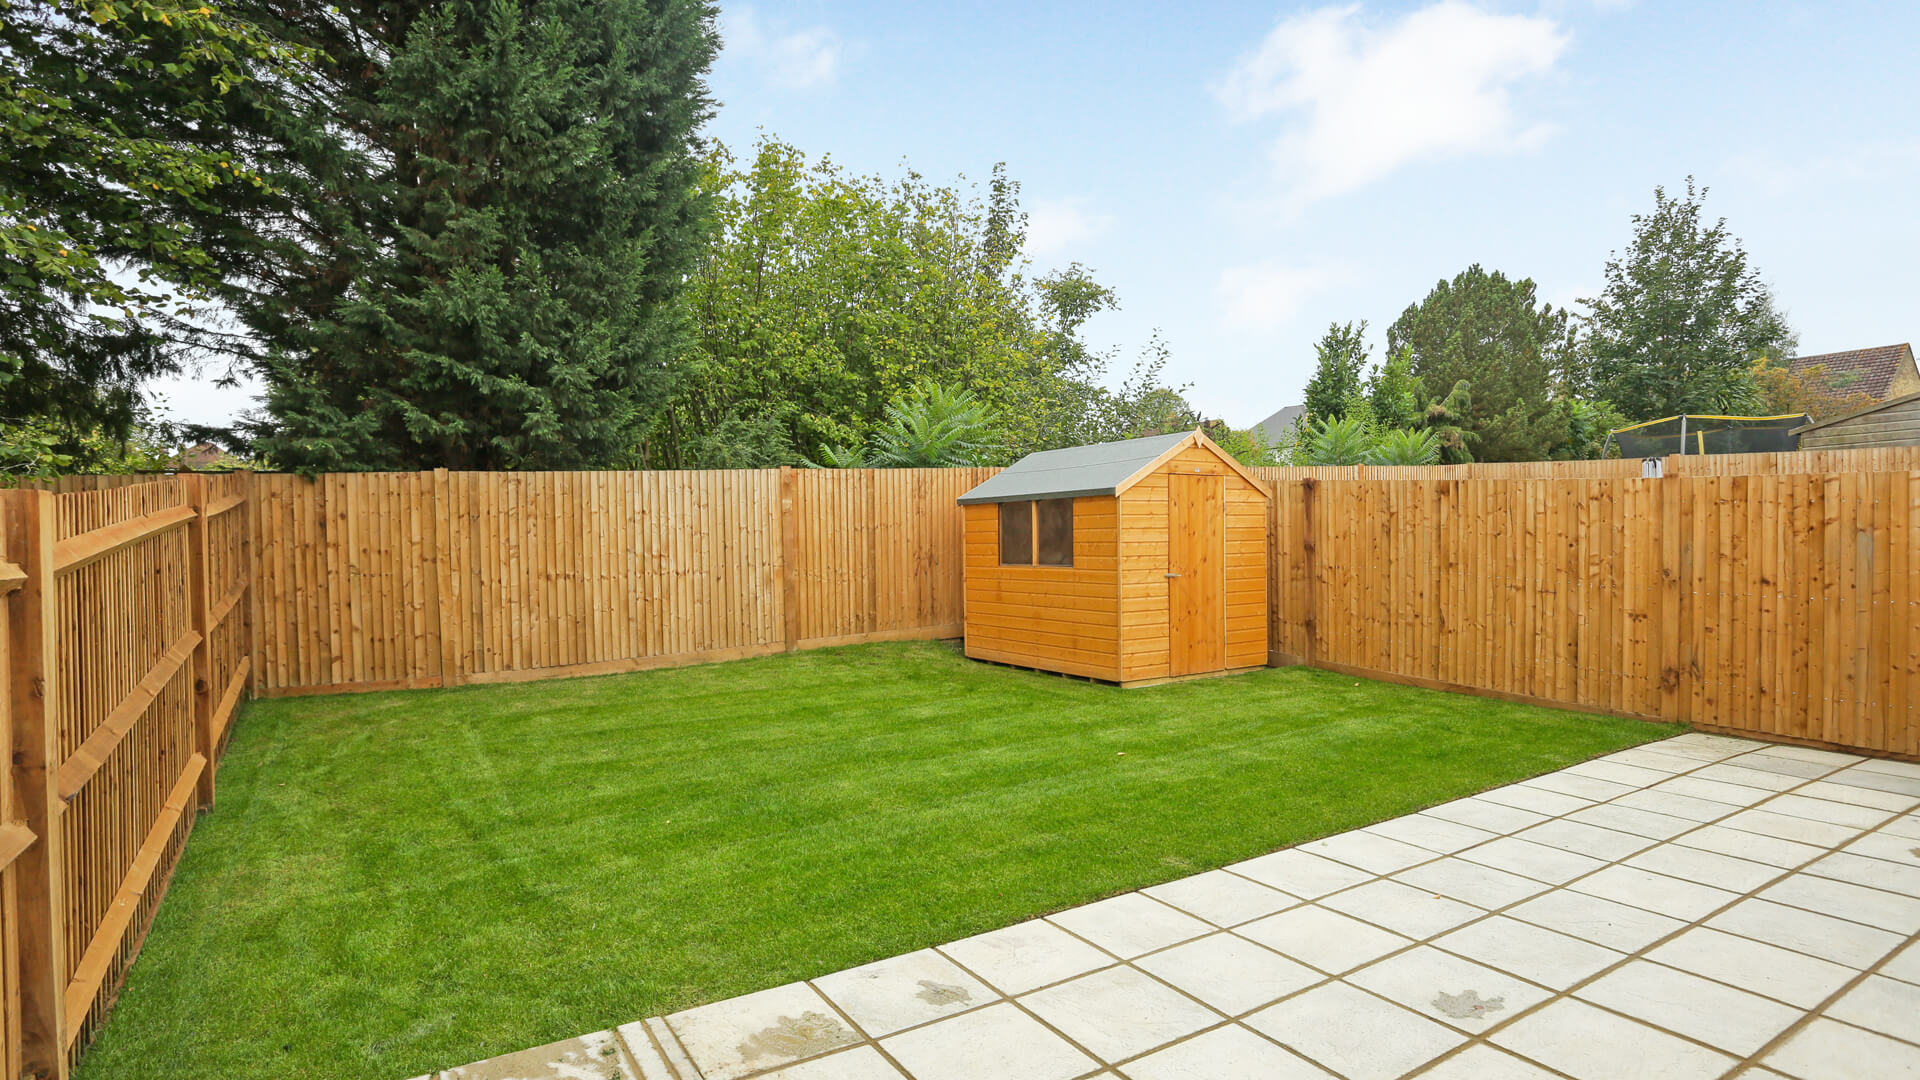 Rear garden with patio and lawn complete with shed